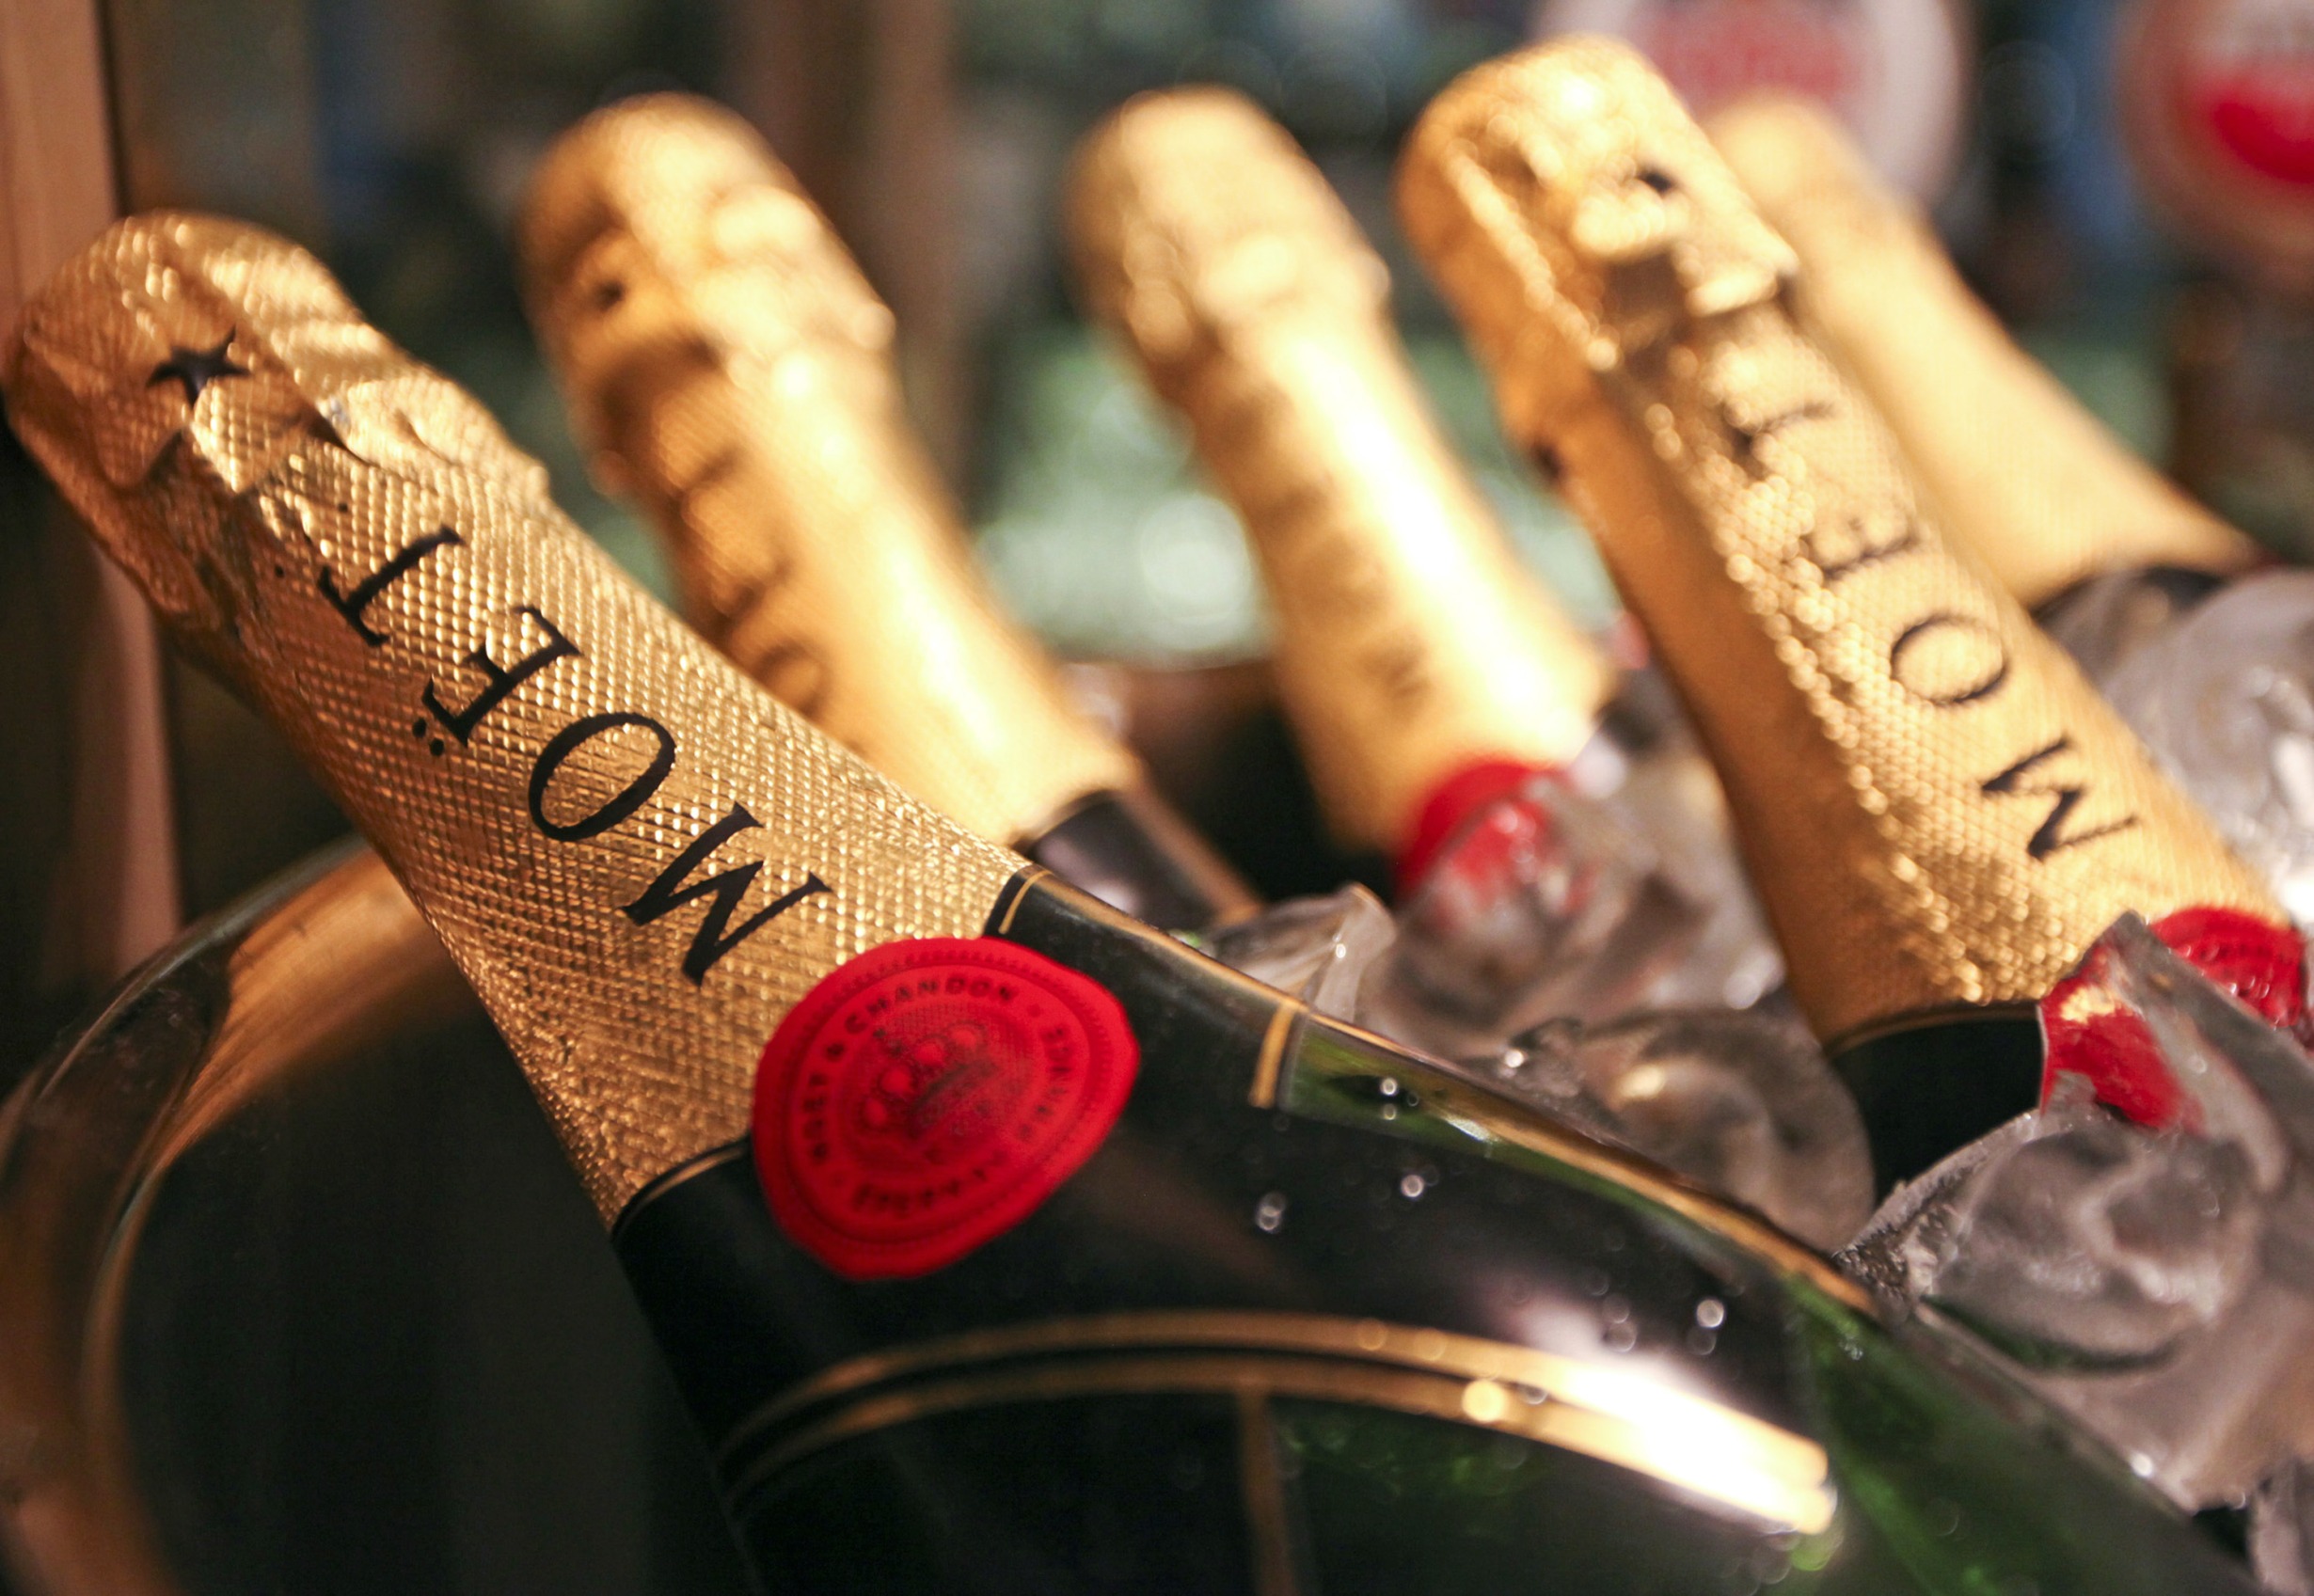 Moet to Label Its Champagne Sparkling Wine in Russia to Meet Law - Bloomberg